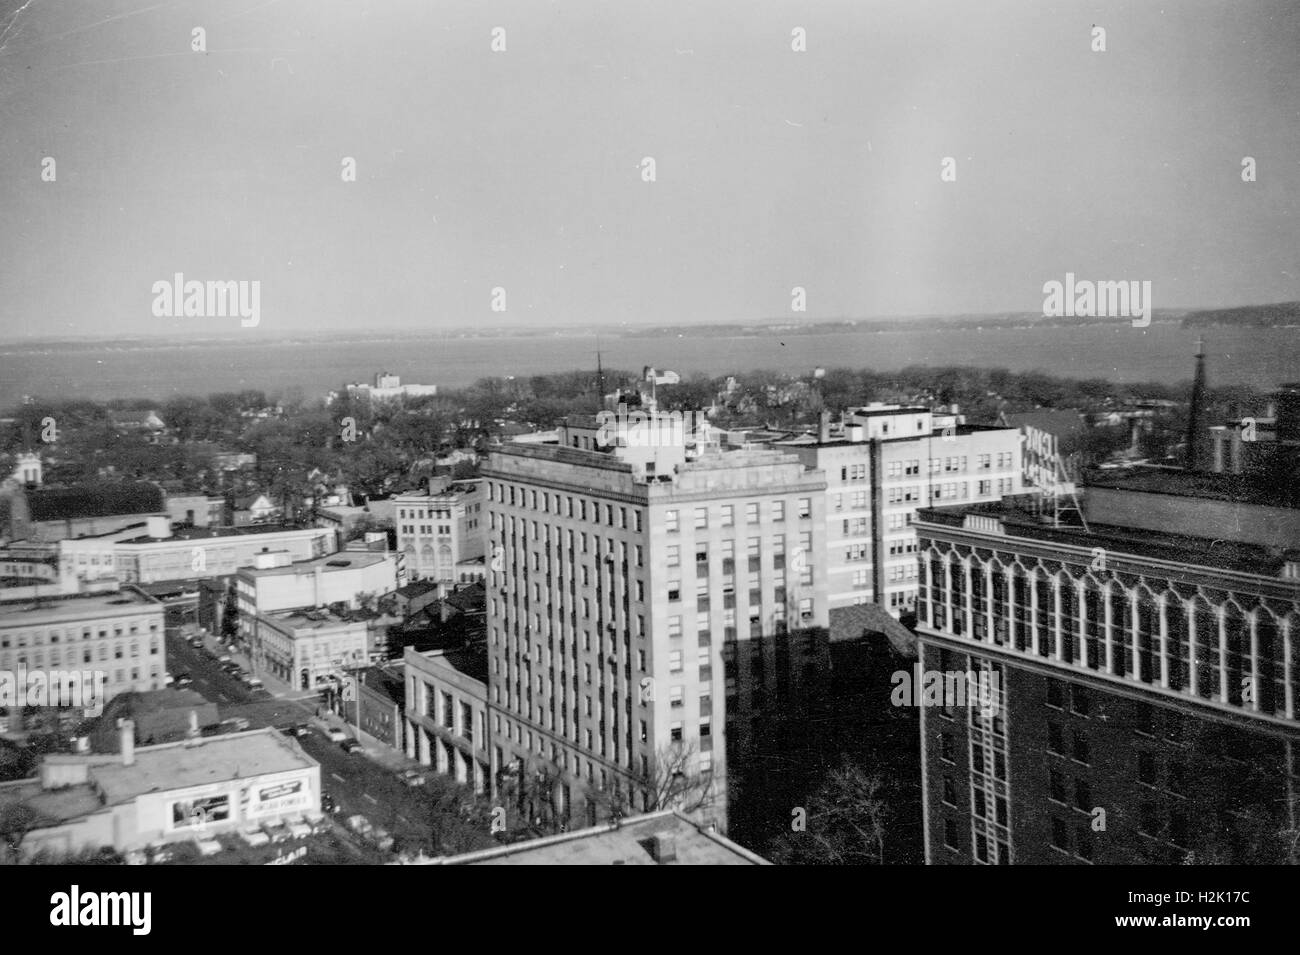 Unknown City, United States - January 01, 1939:  Vintage photograph showing an aerial view of an unidentified American city, 1939 Stock Photo